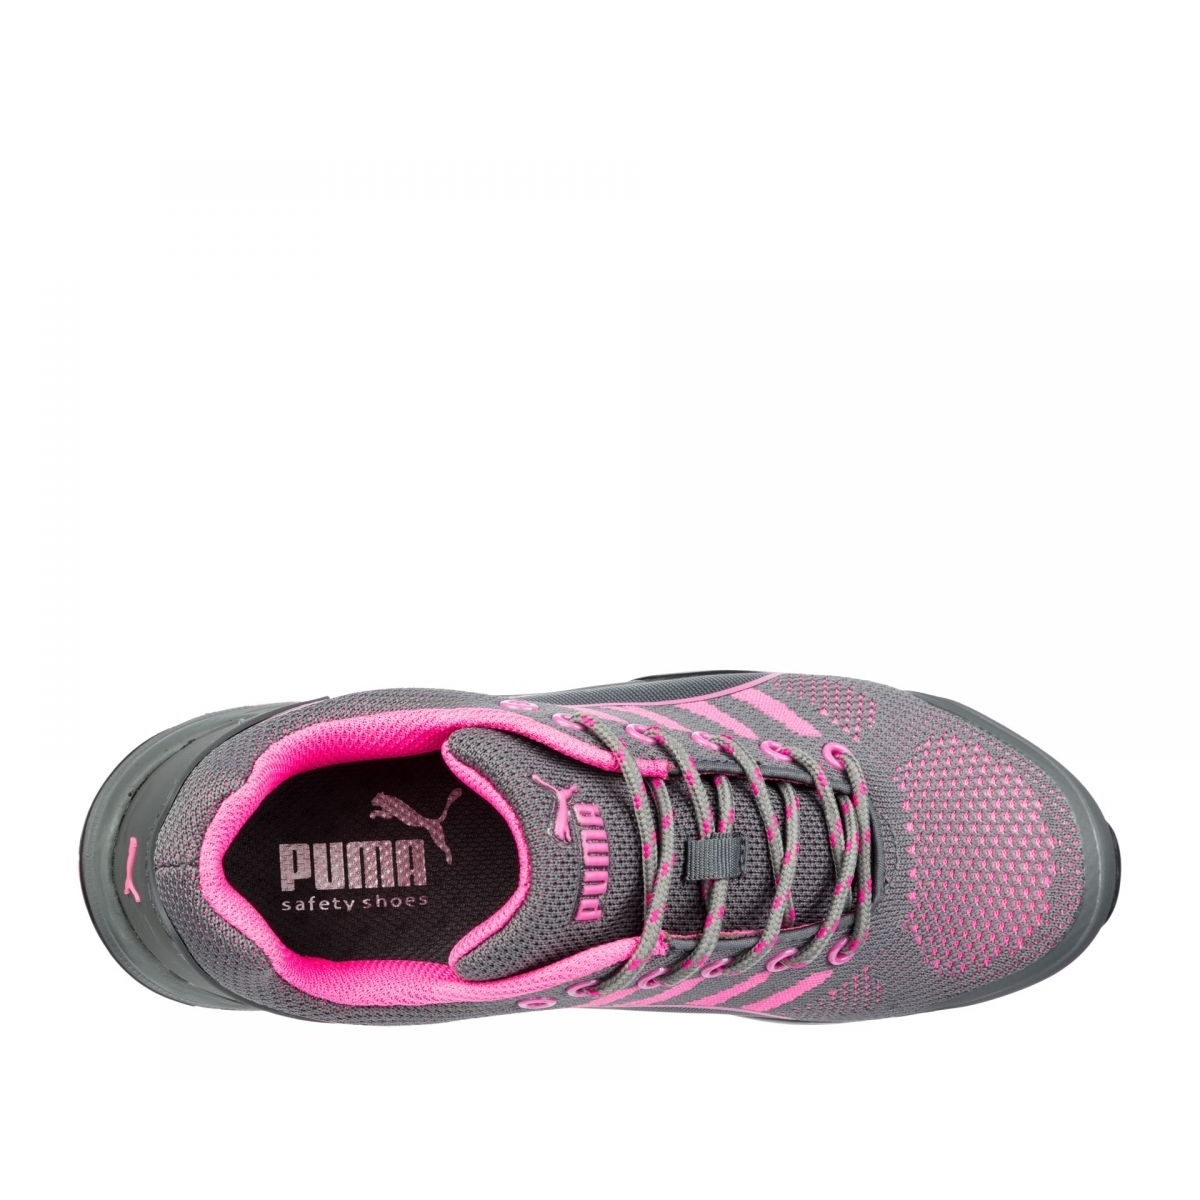 PUMA Safety Women's Celerity Knit Low Steel Toe ESD Work Shoe Pink - 642915 ONE SIZE PINK - PINK, 7.5